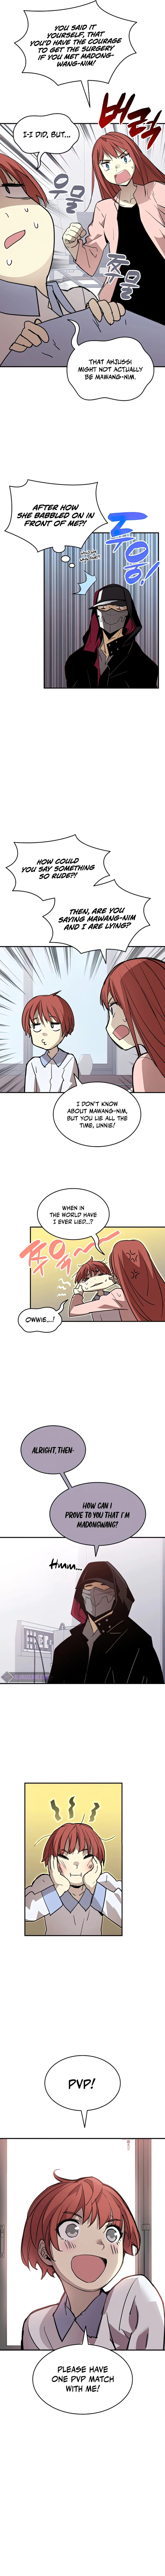 Worn and Torn Newbie - Chapter 101 Page 3